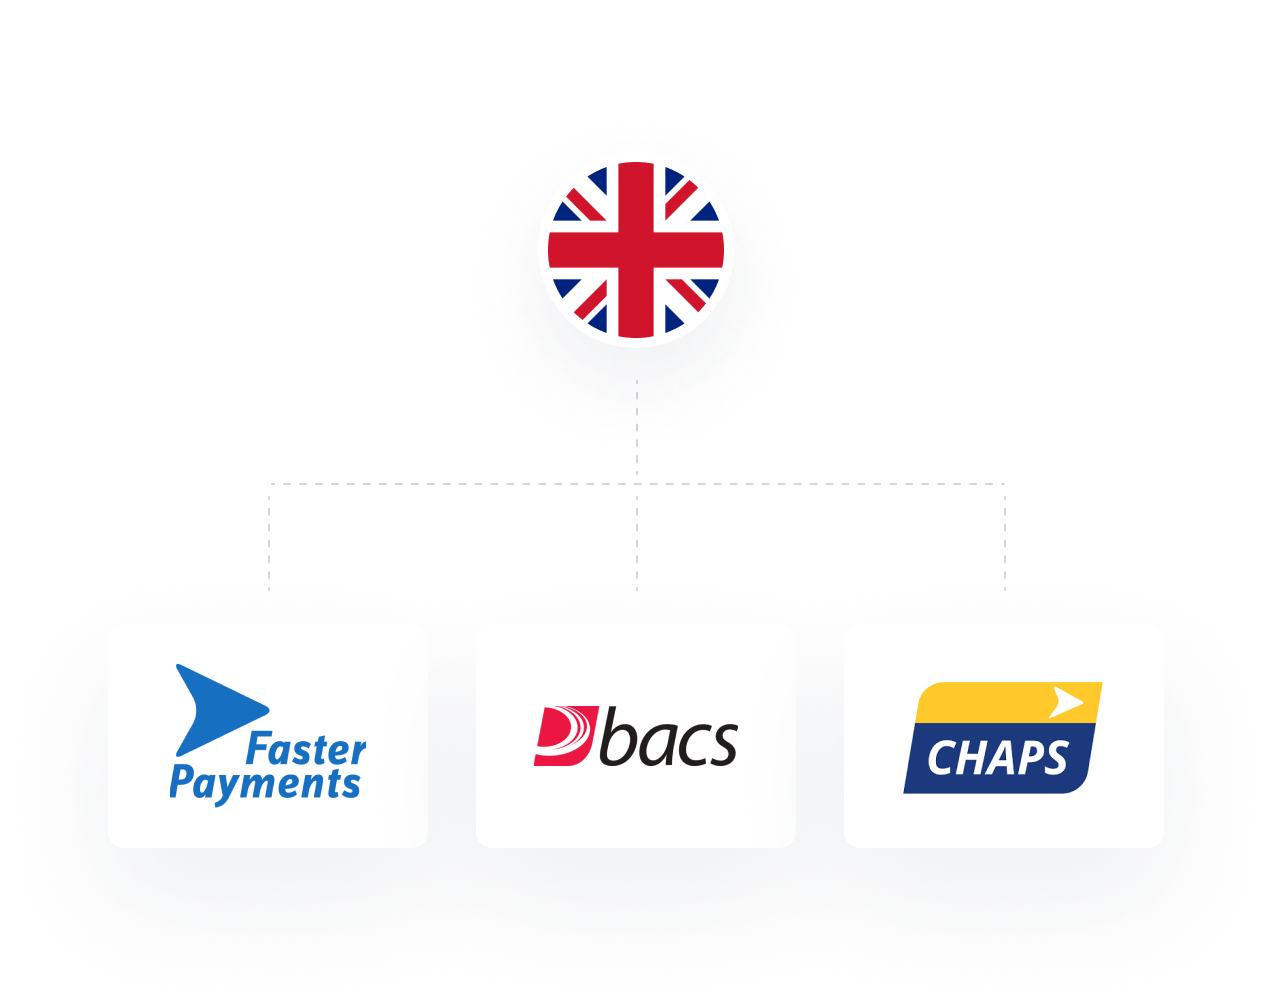 Faster Payments, Chaps, Bacs